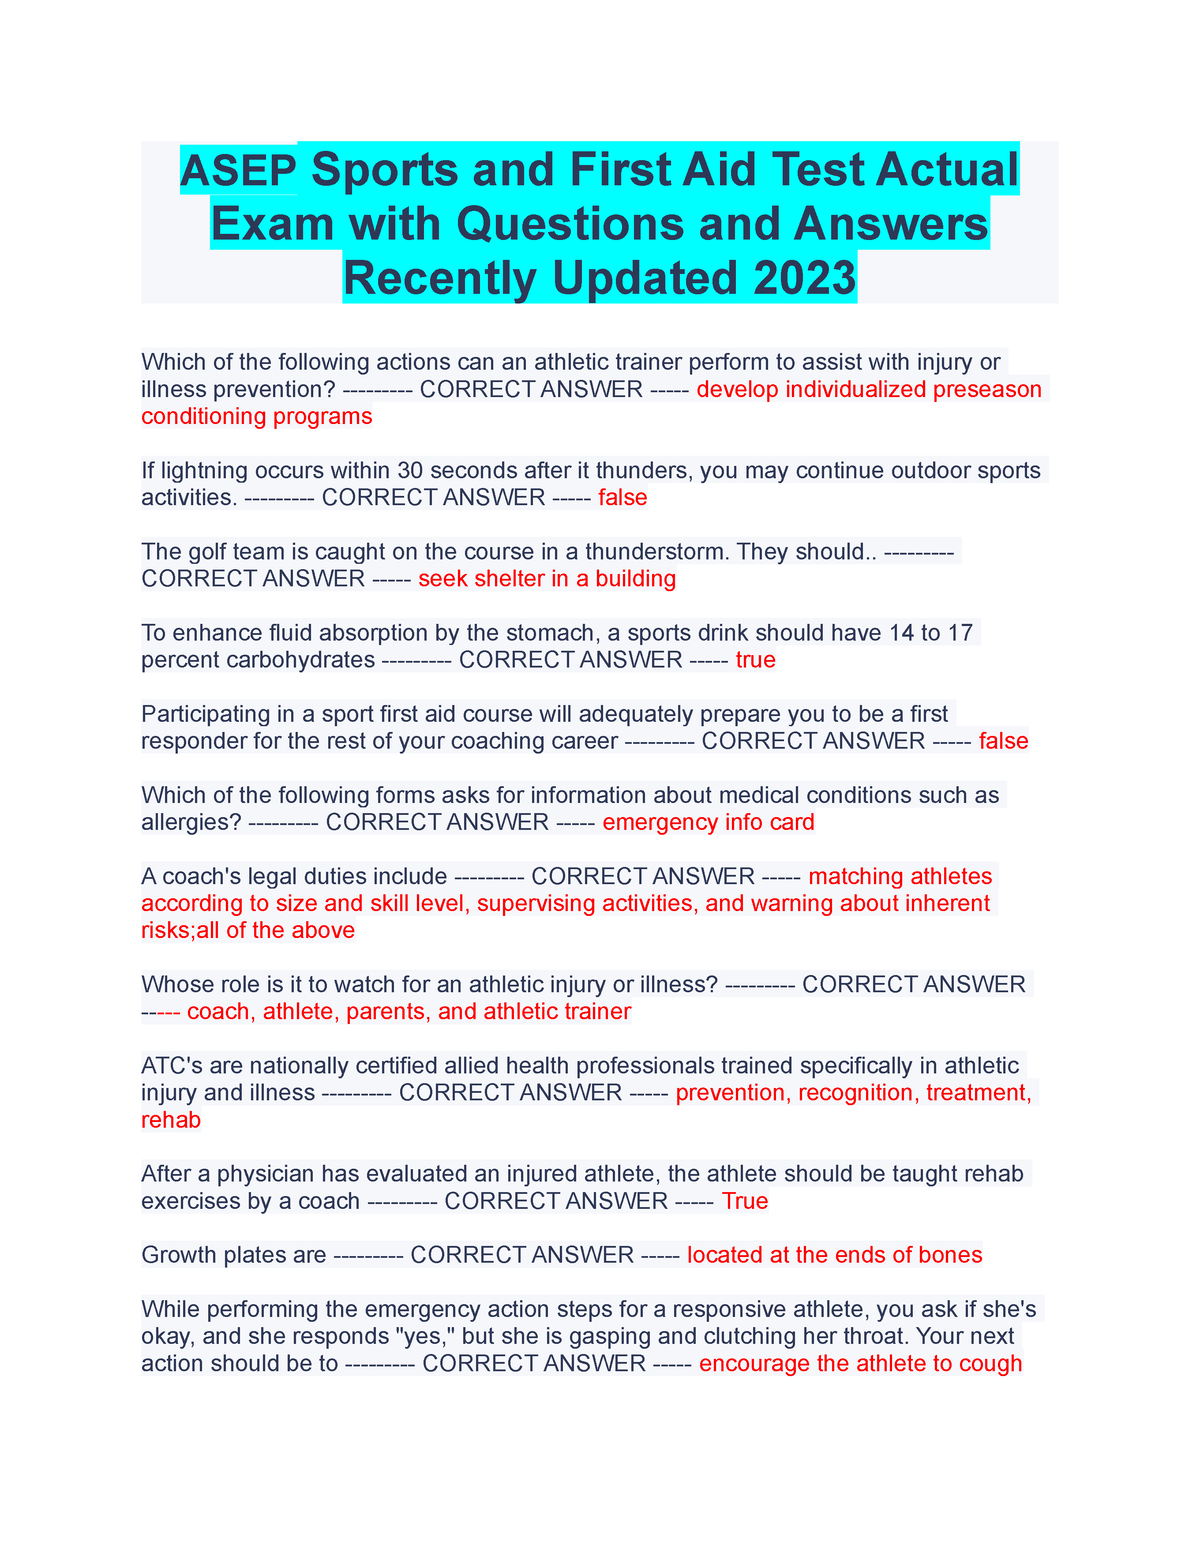 ASEP Sports and First Aid Test Actual Exam with Questions and Answers  Recently Updated 2023 - Studocu